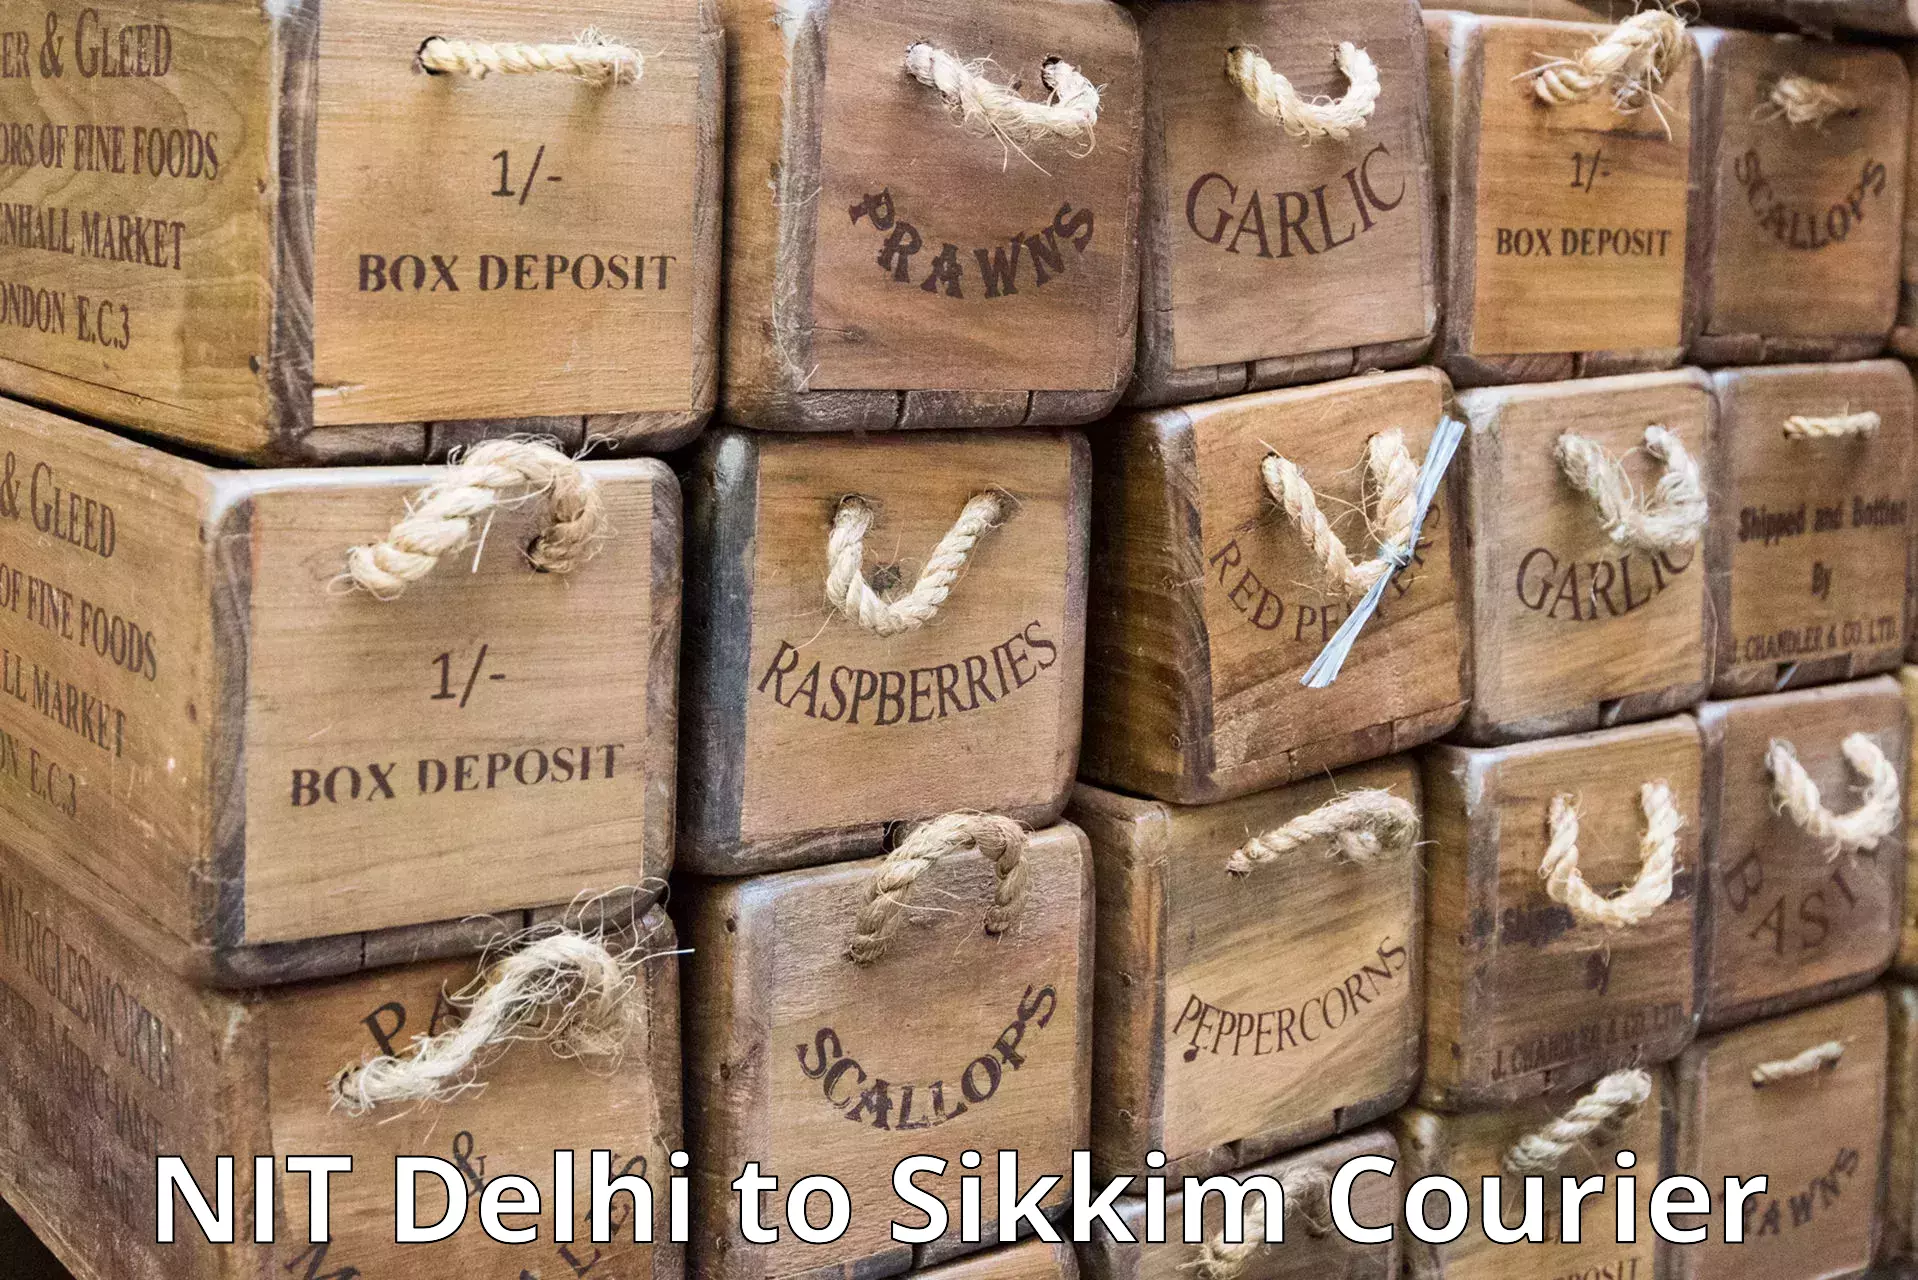 24/7 shipping services NIT Delhi to Sikkim